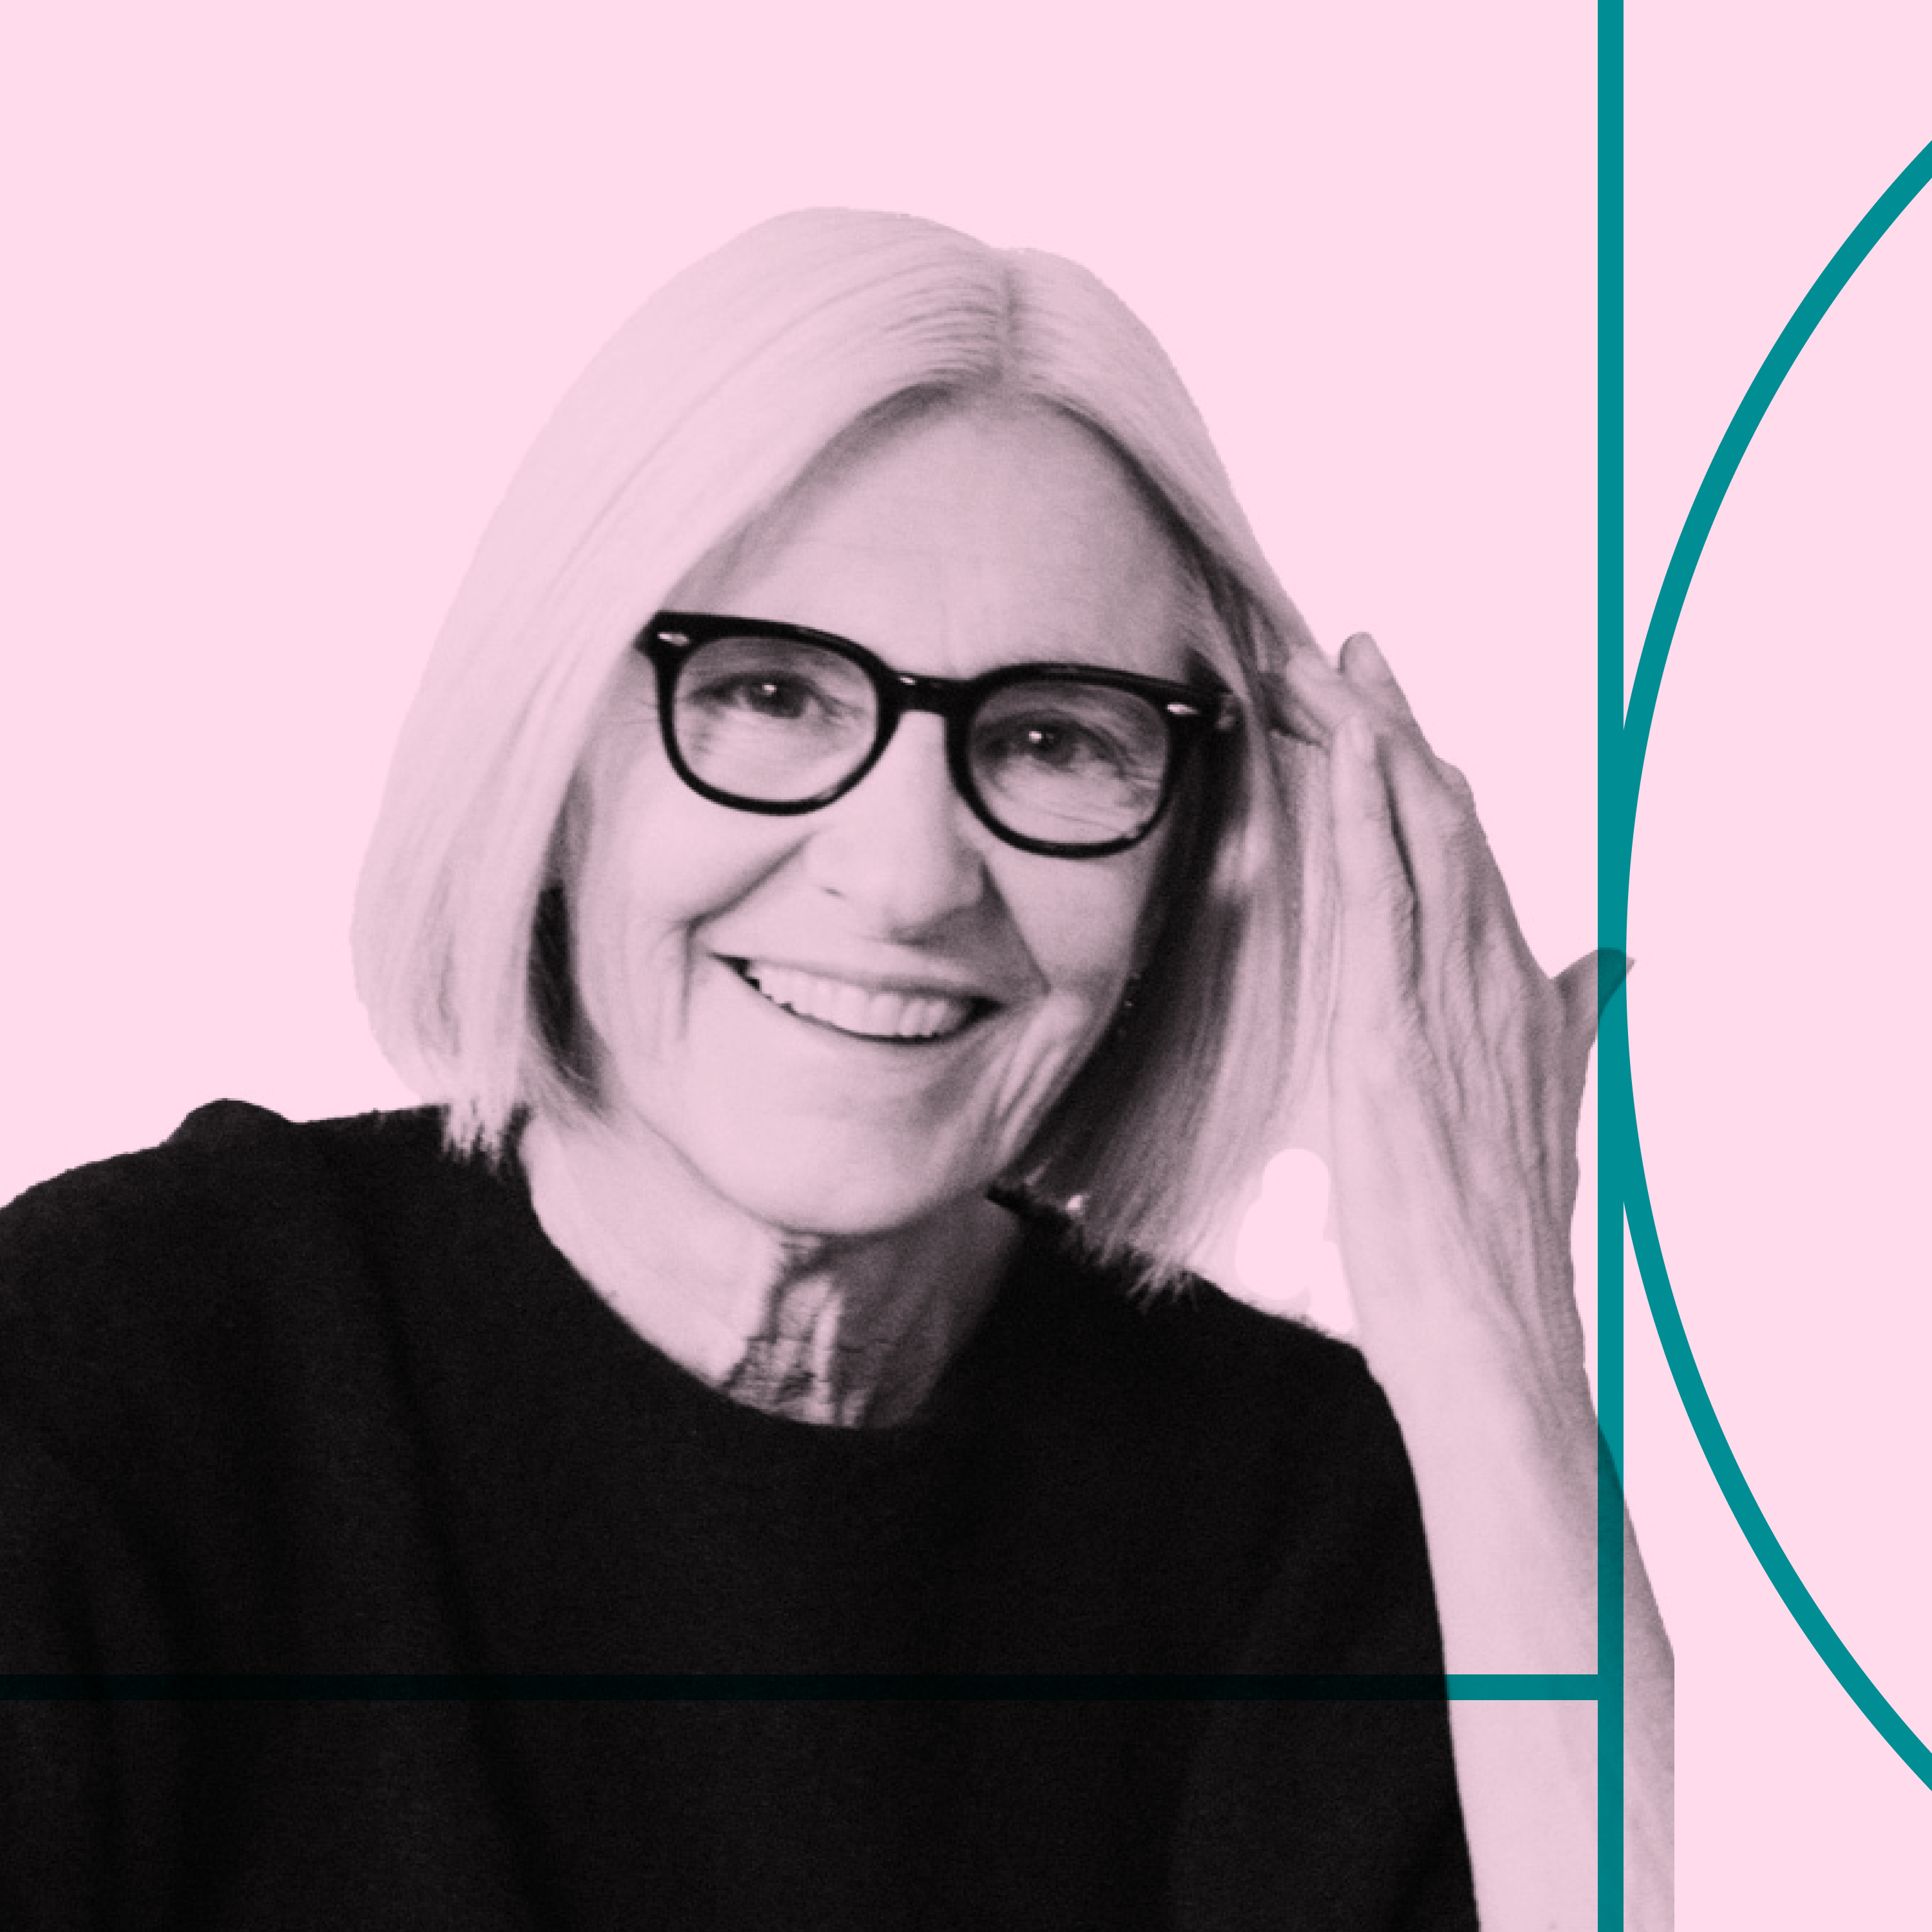 Rewind: Eileen Fisher: Embracing imperfect newness